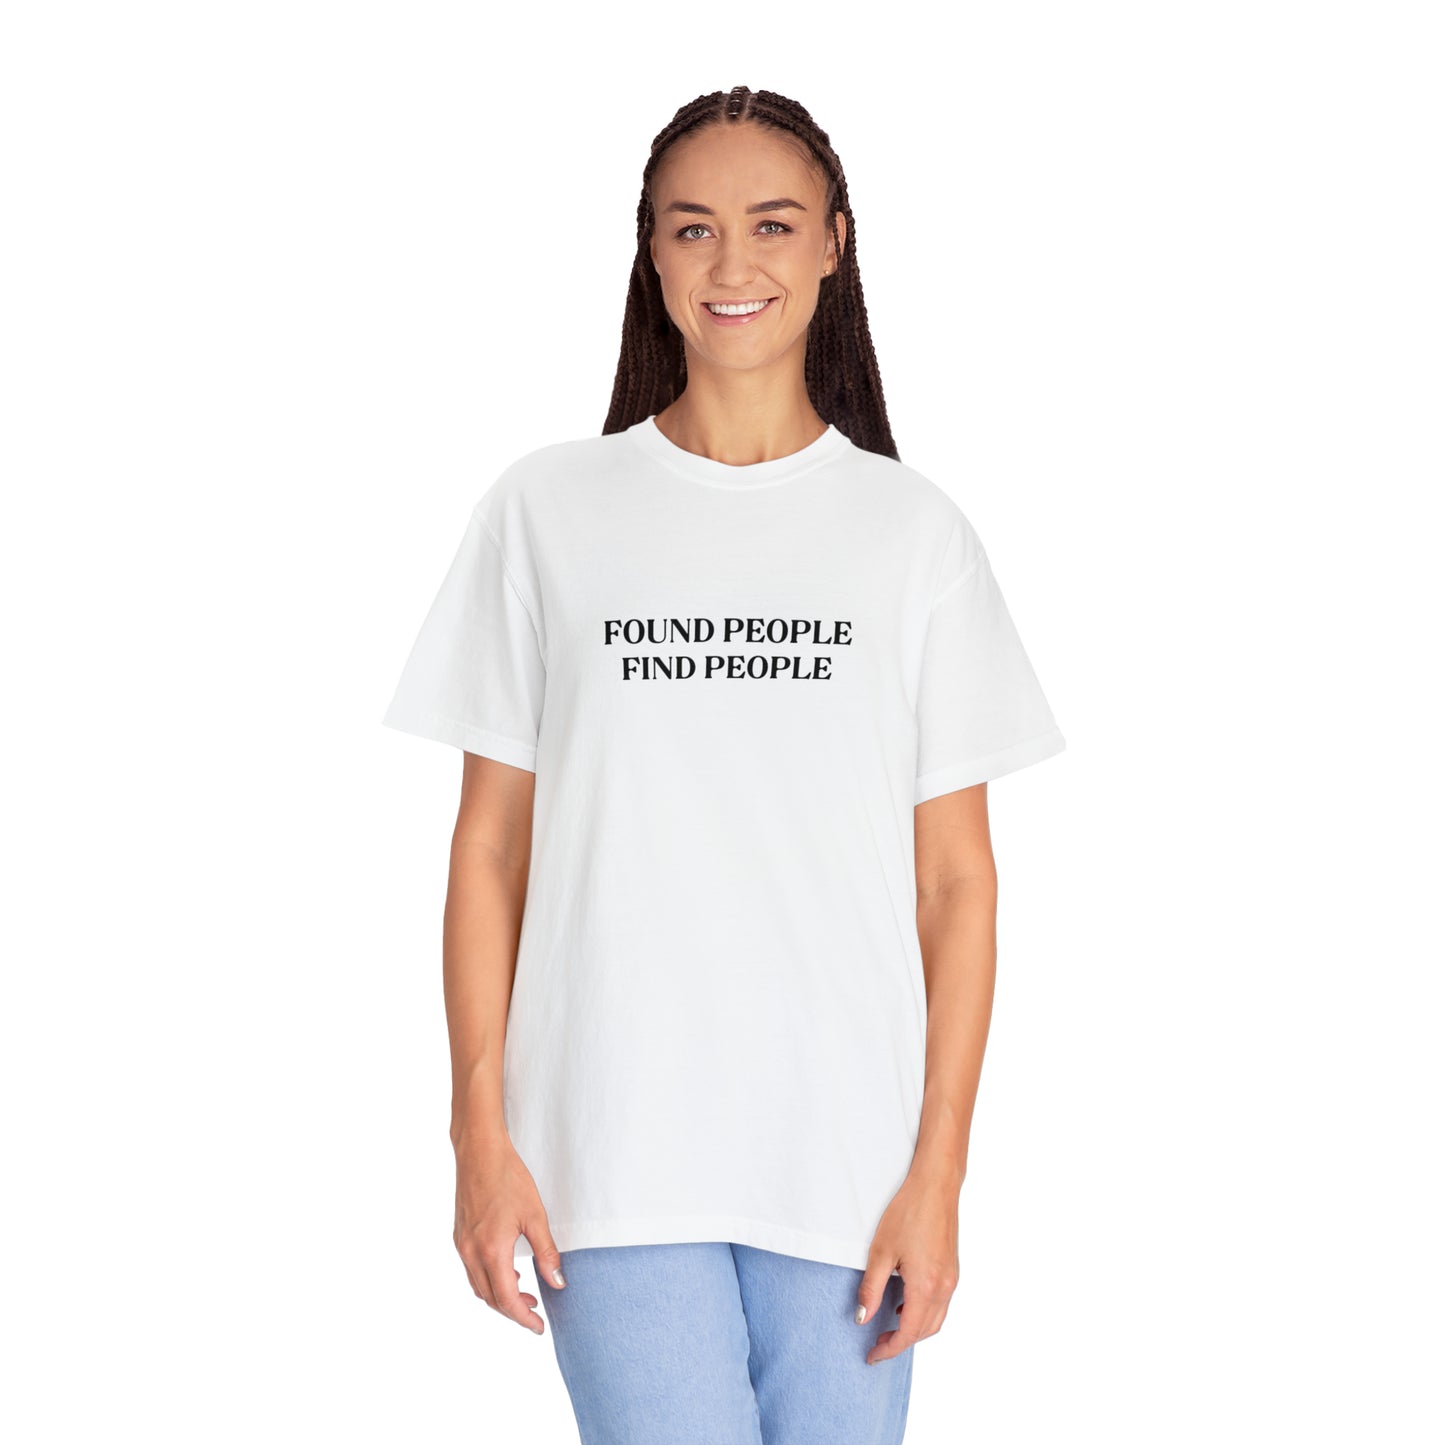 Found People Find People Tee